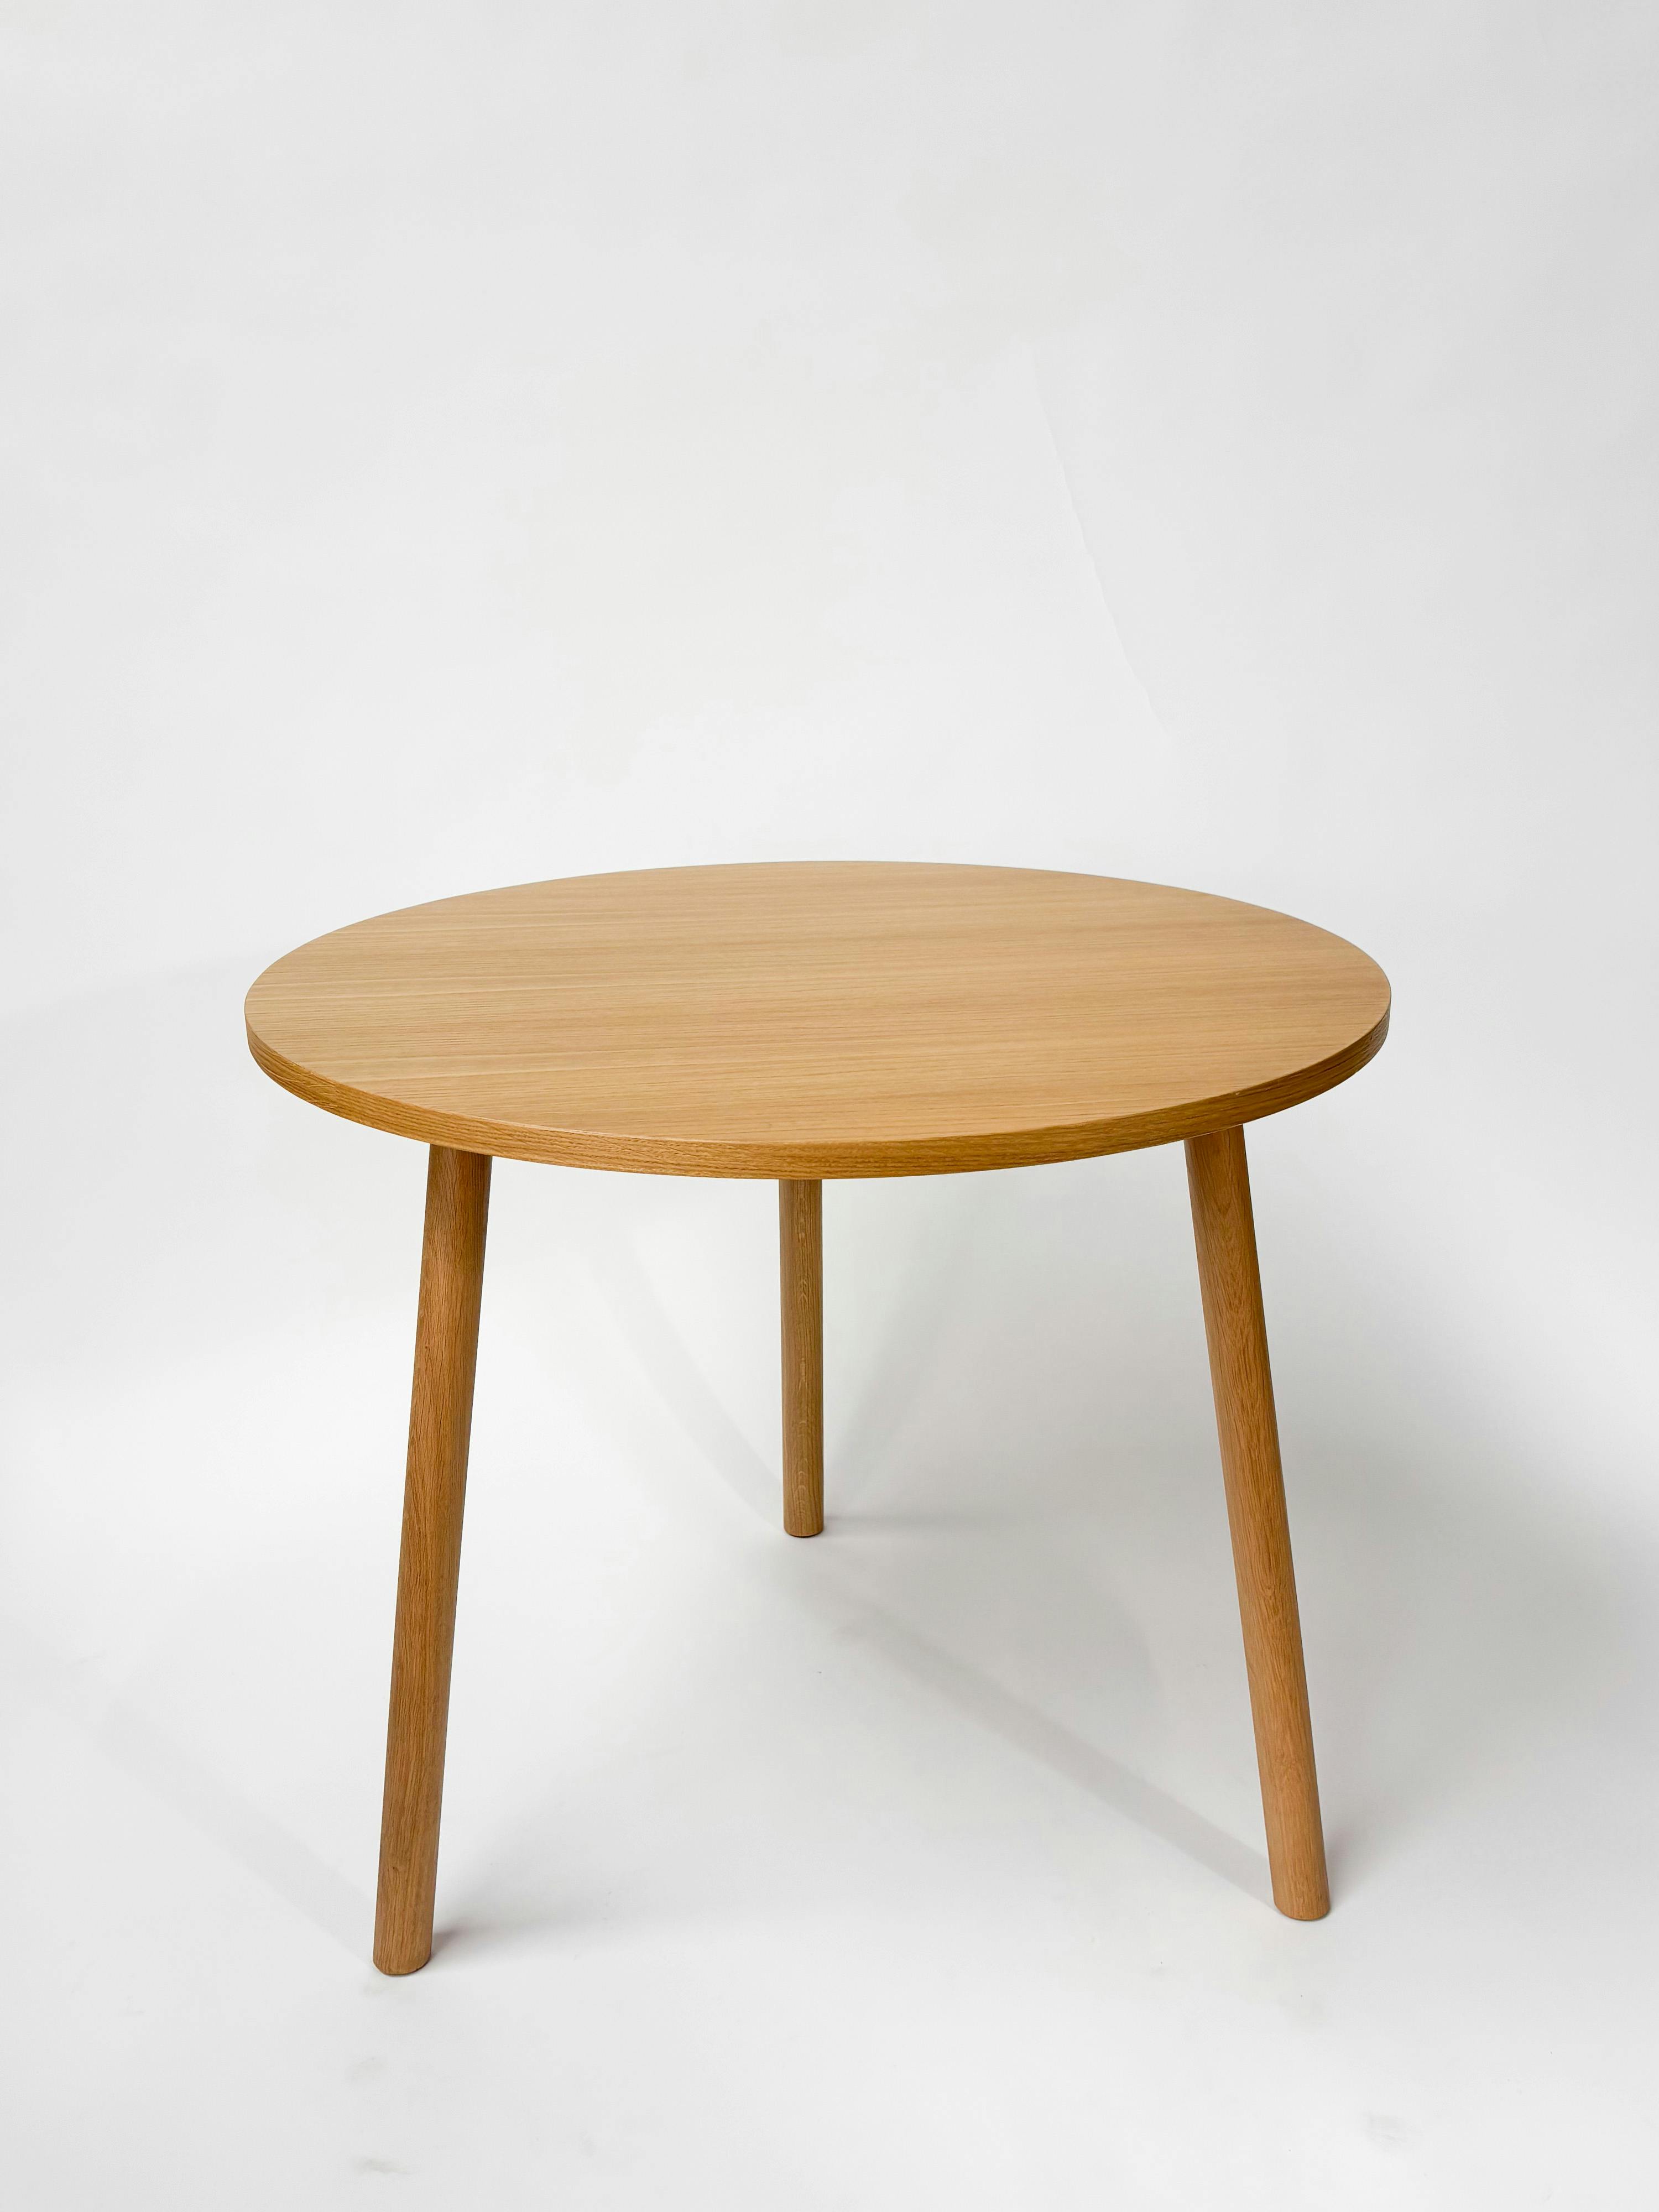 CRUSO Natural Oak Wooden Table - 90cm - Relieve Furniture